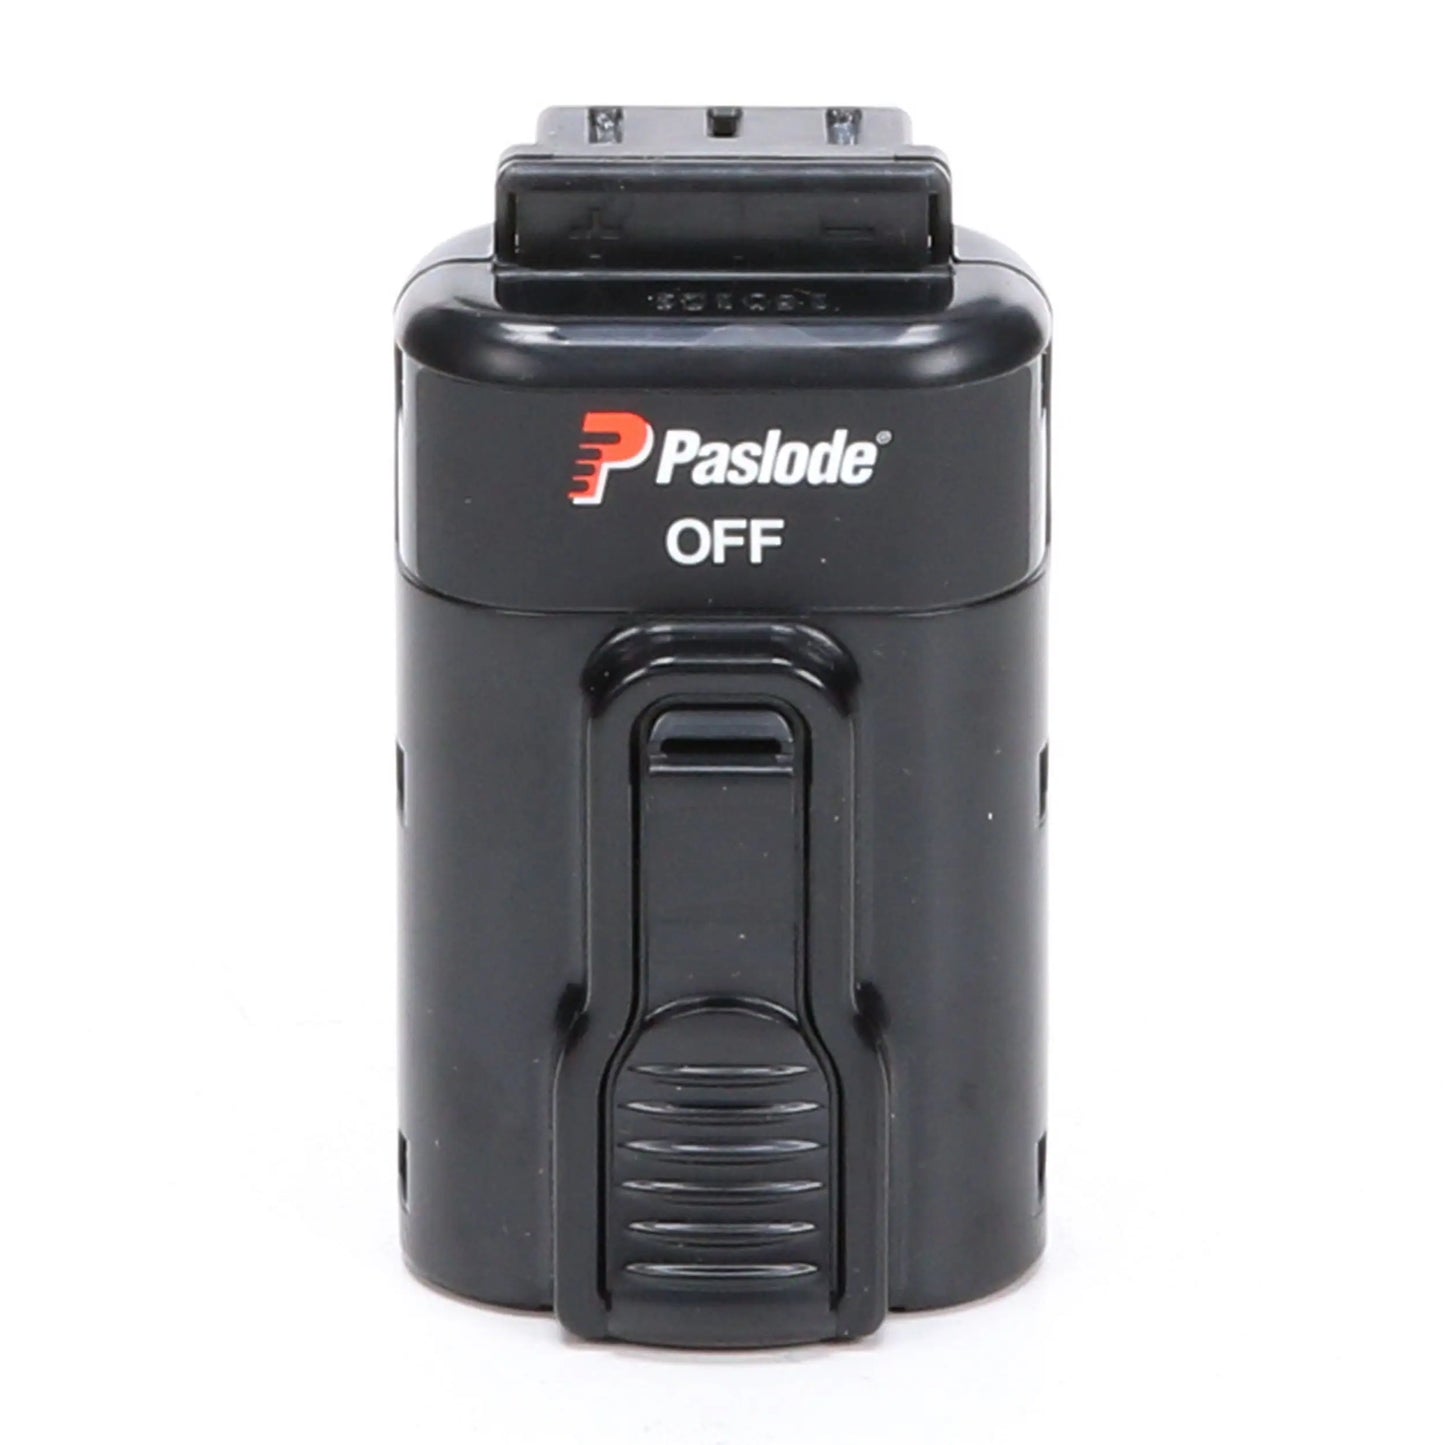 Paslode 7.4V Lithium-Ion Rechargeable Battery (902654)